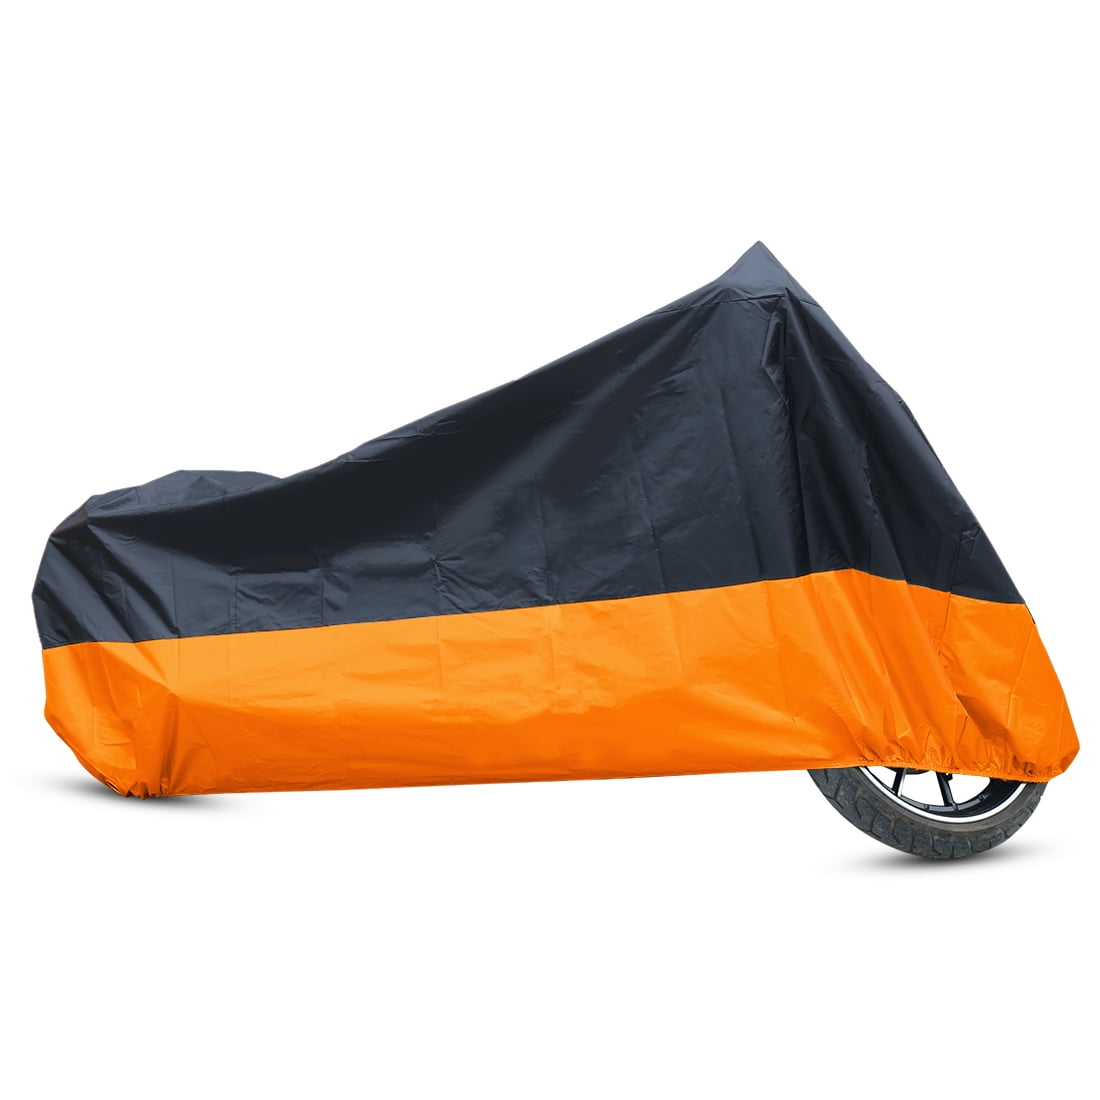 XXXL Motorcycle Cover Waterproof For Harley Davidson Electra Glide Ultra Classic